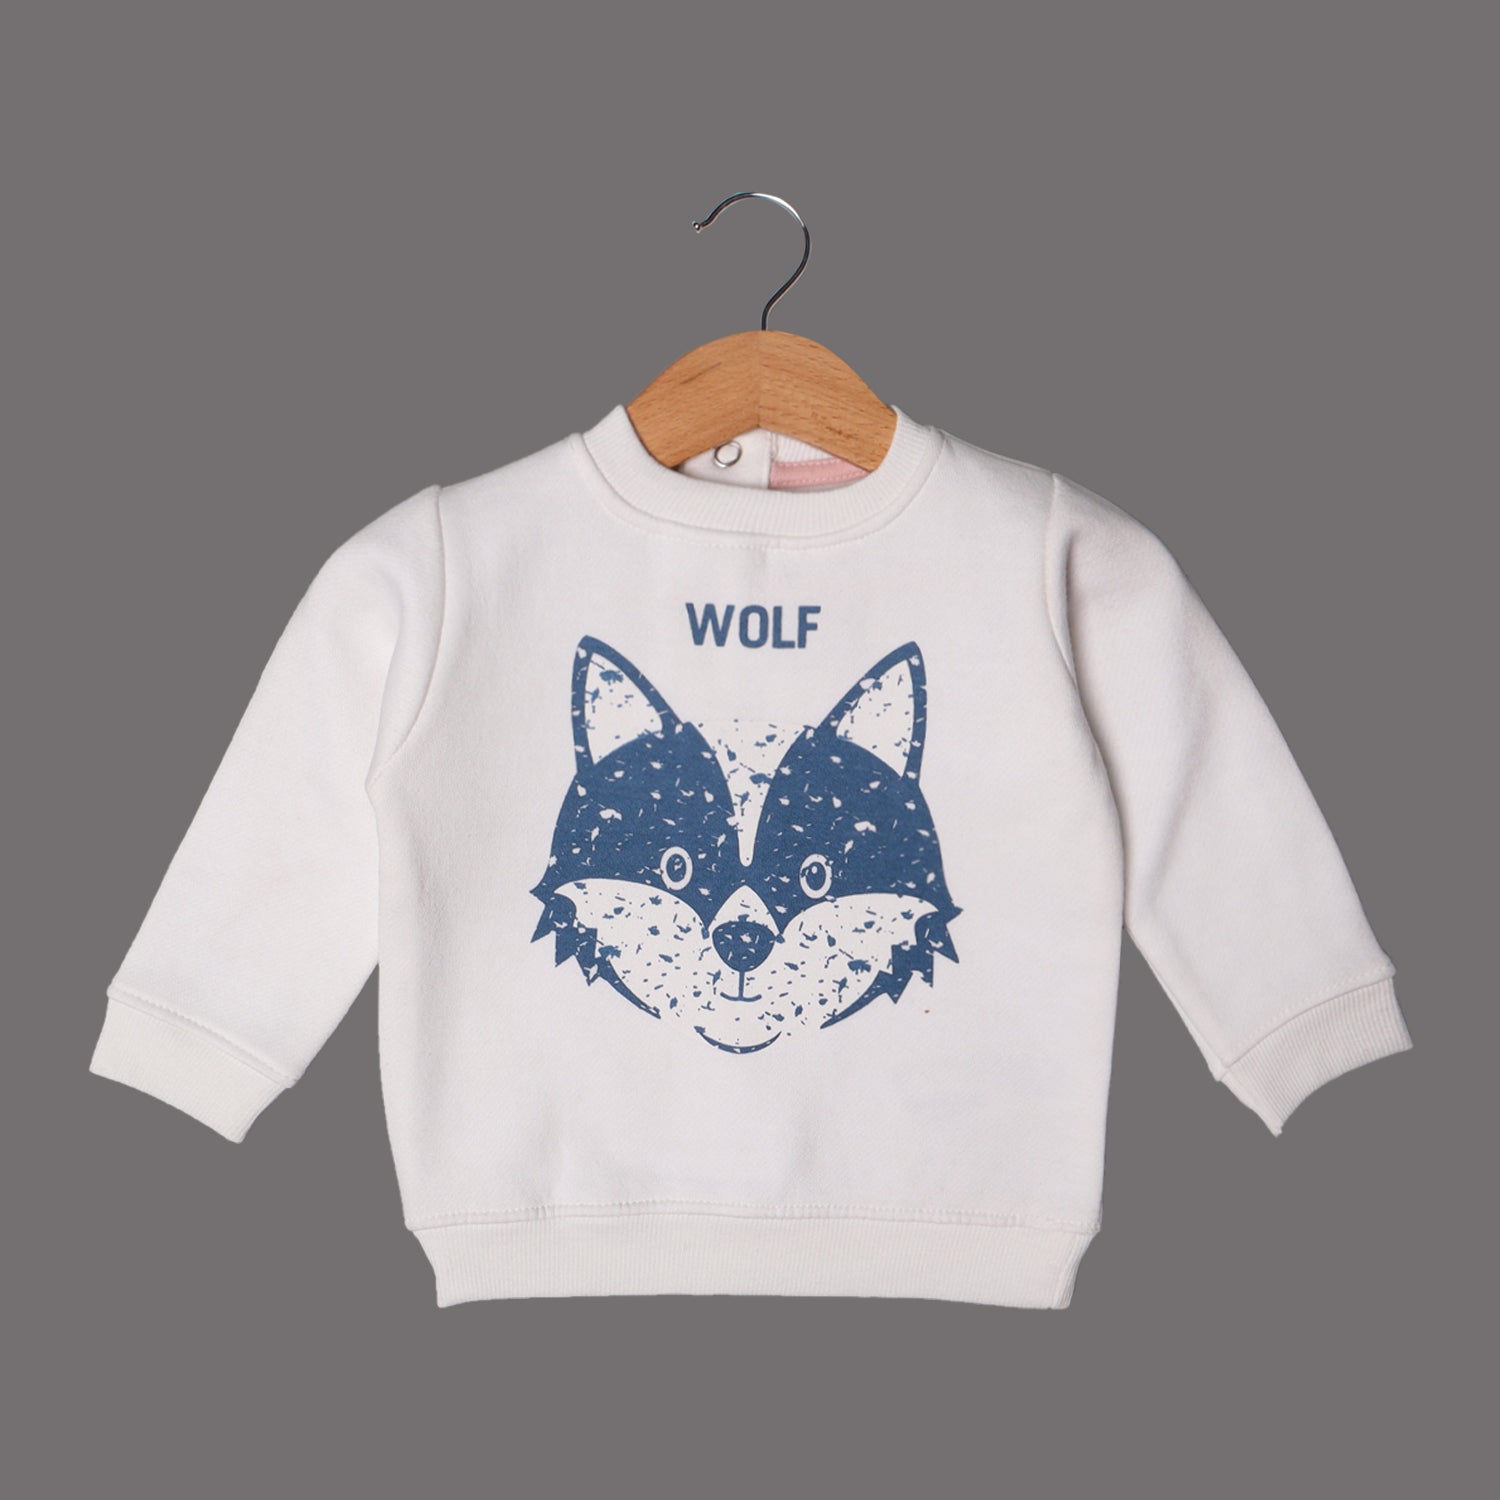 WHITE WOLF FACE PRINTED SWEATSHIRT FOR BOYS